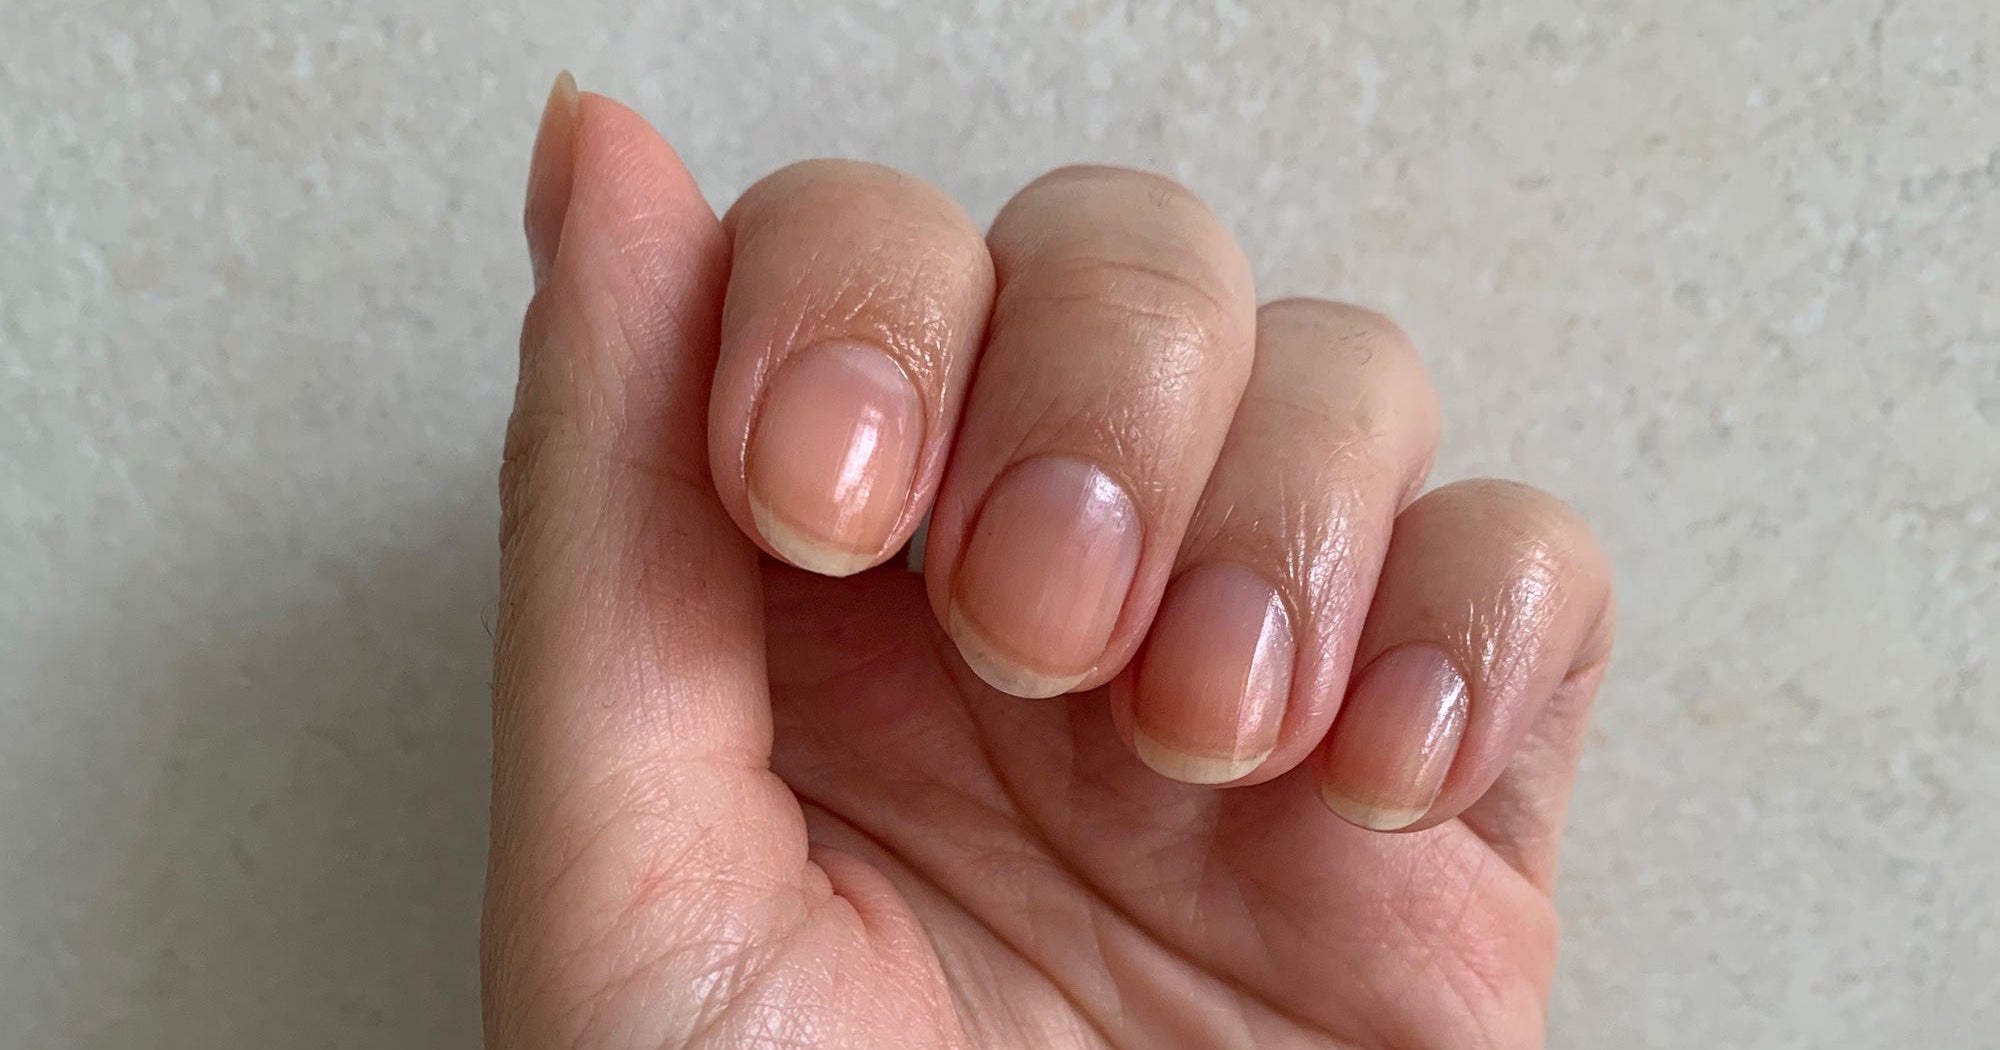 Help! How can I save my brittle nails? : r/DipPowderNails